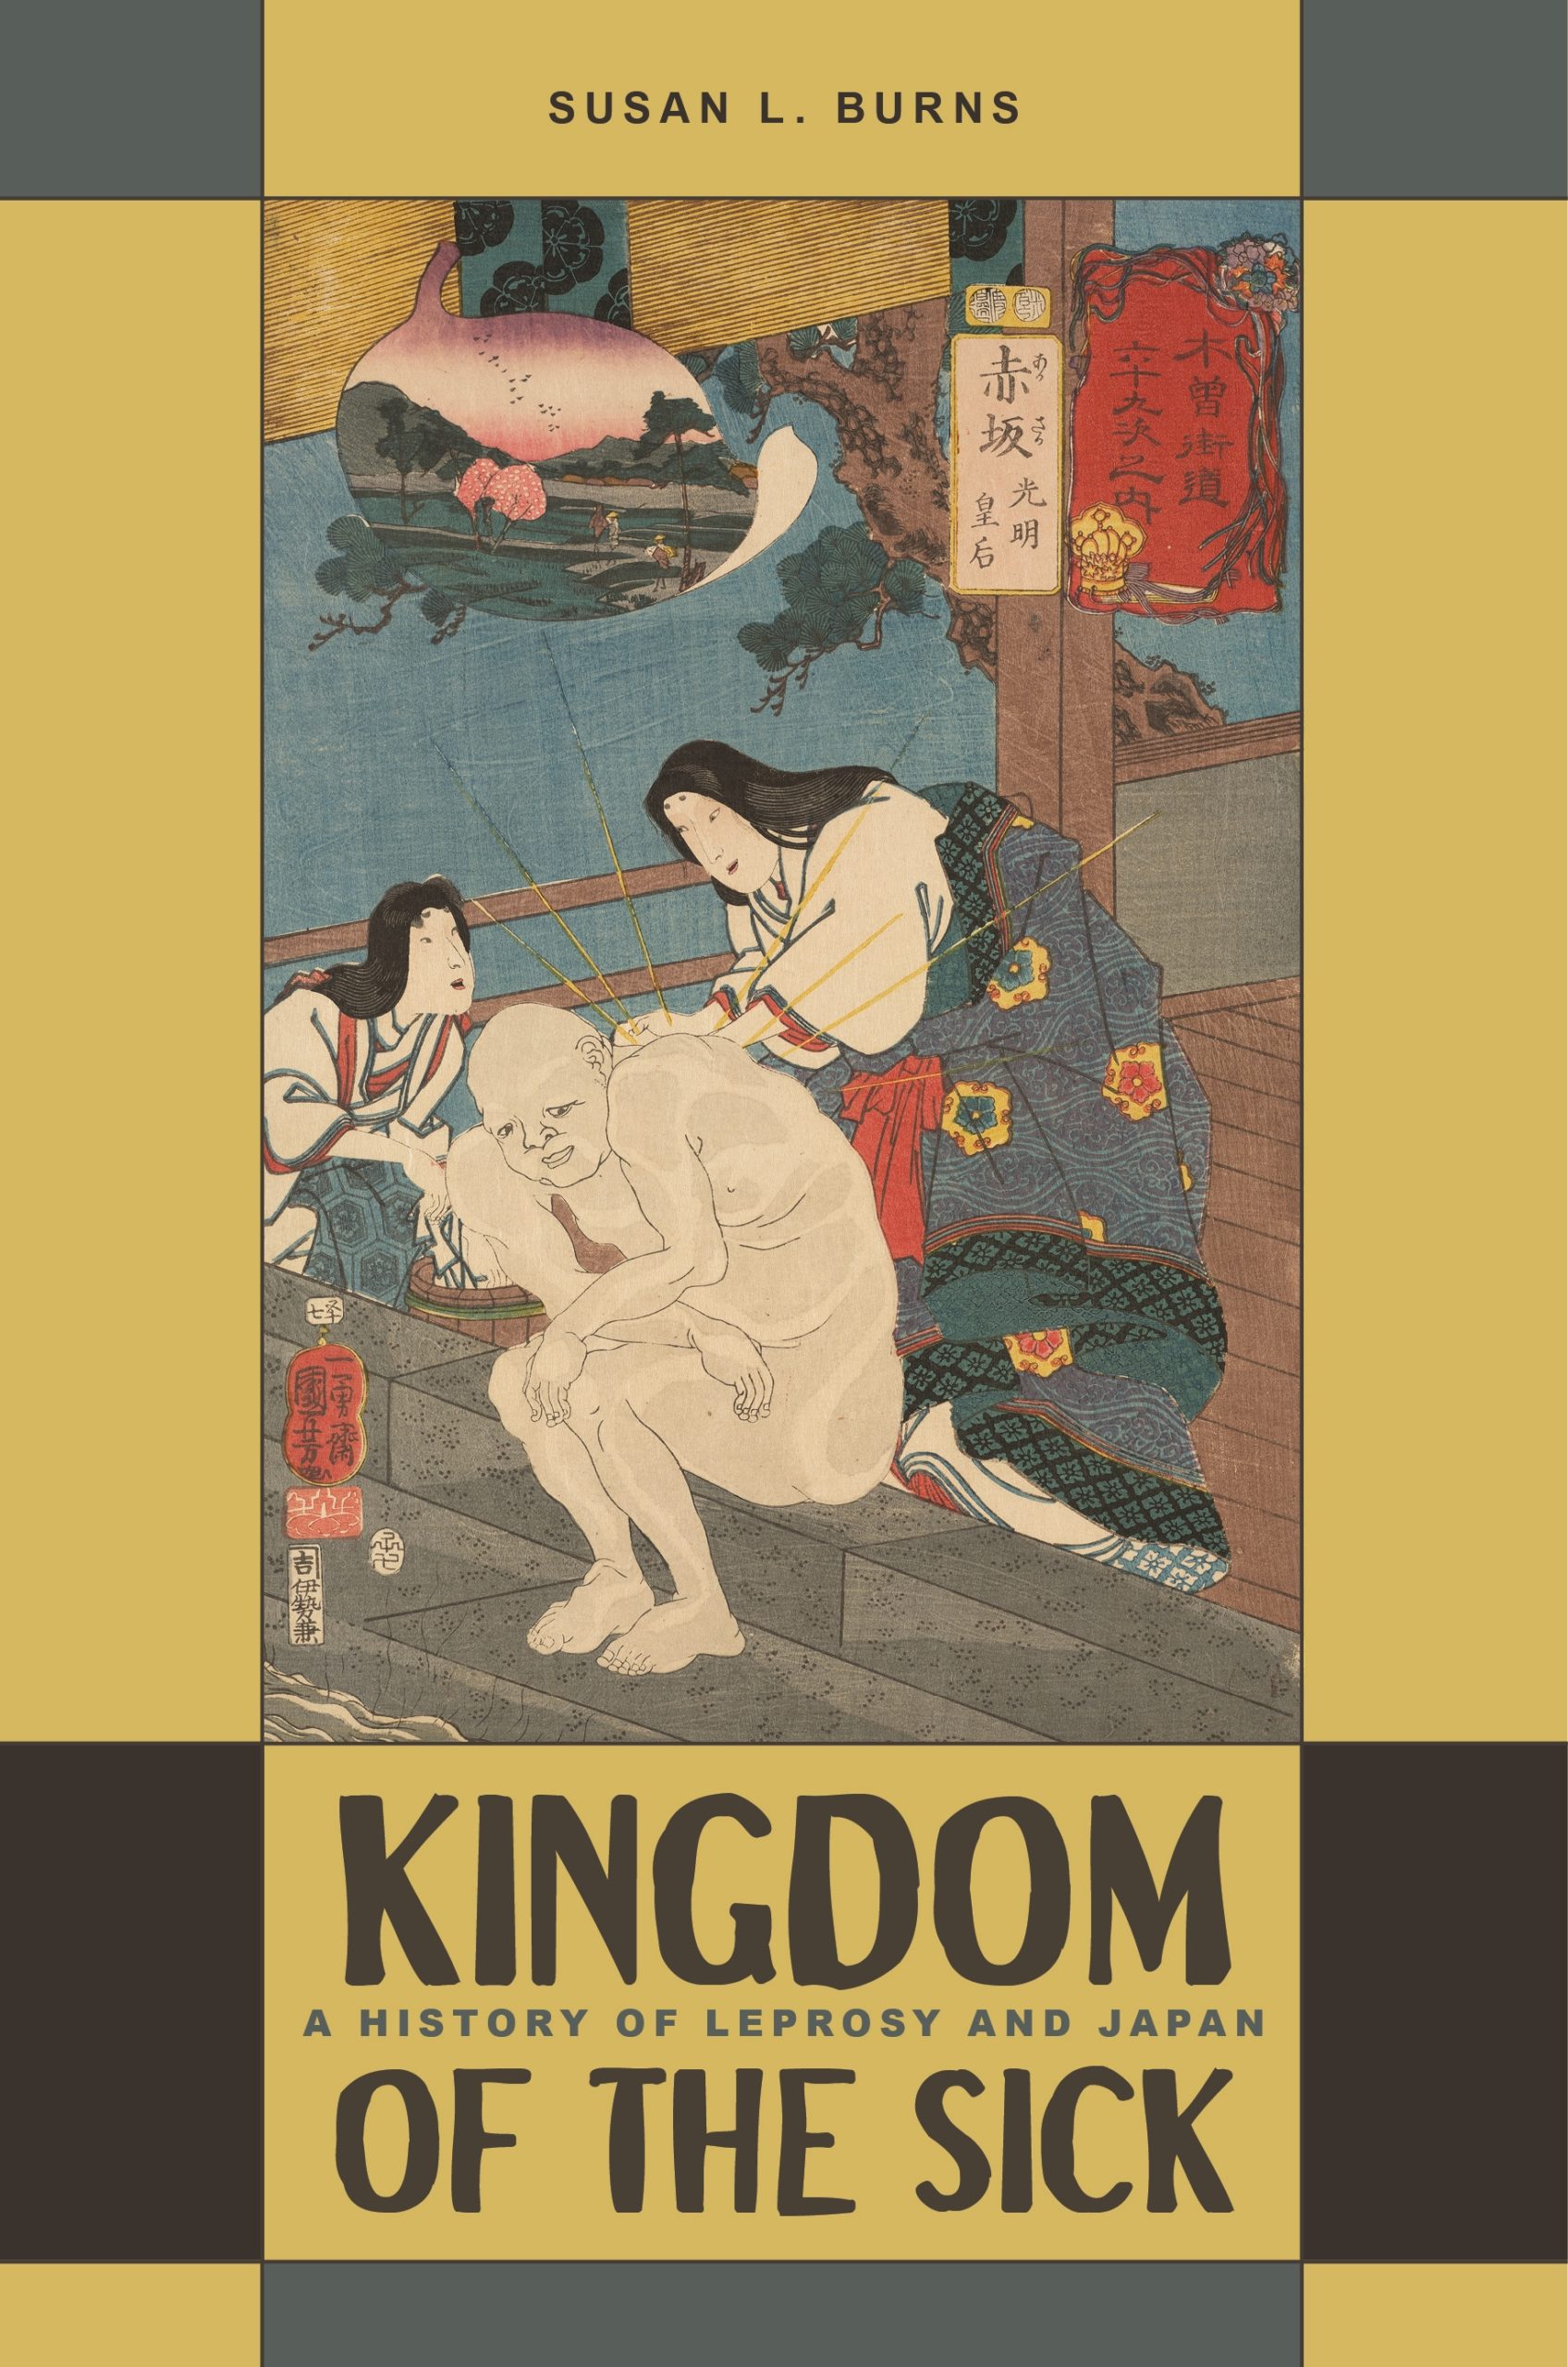 BOOK REVIEW Kingdom of the Sick A History of Leprosy and Japan, by Susan L